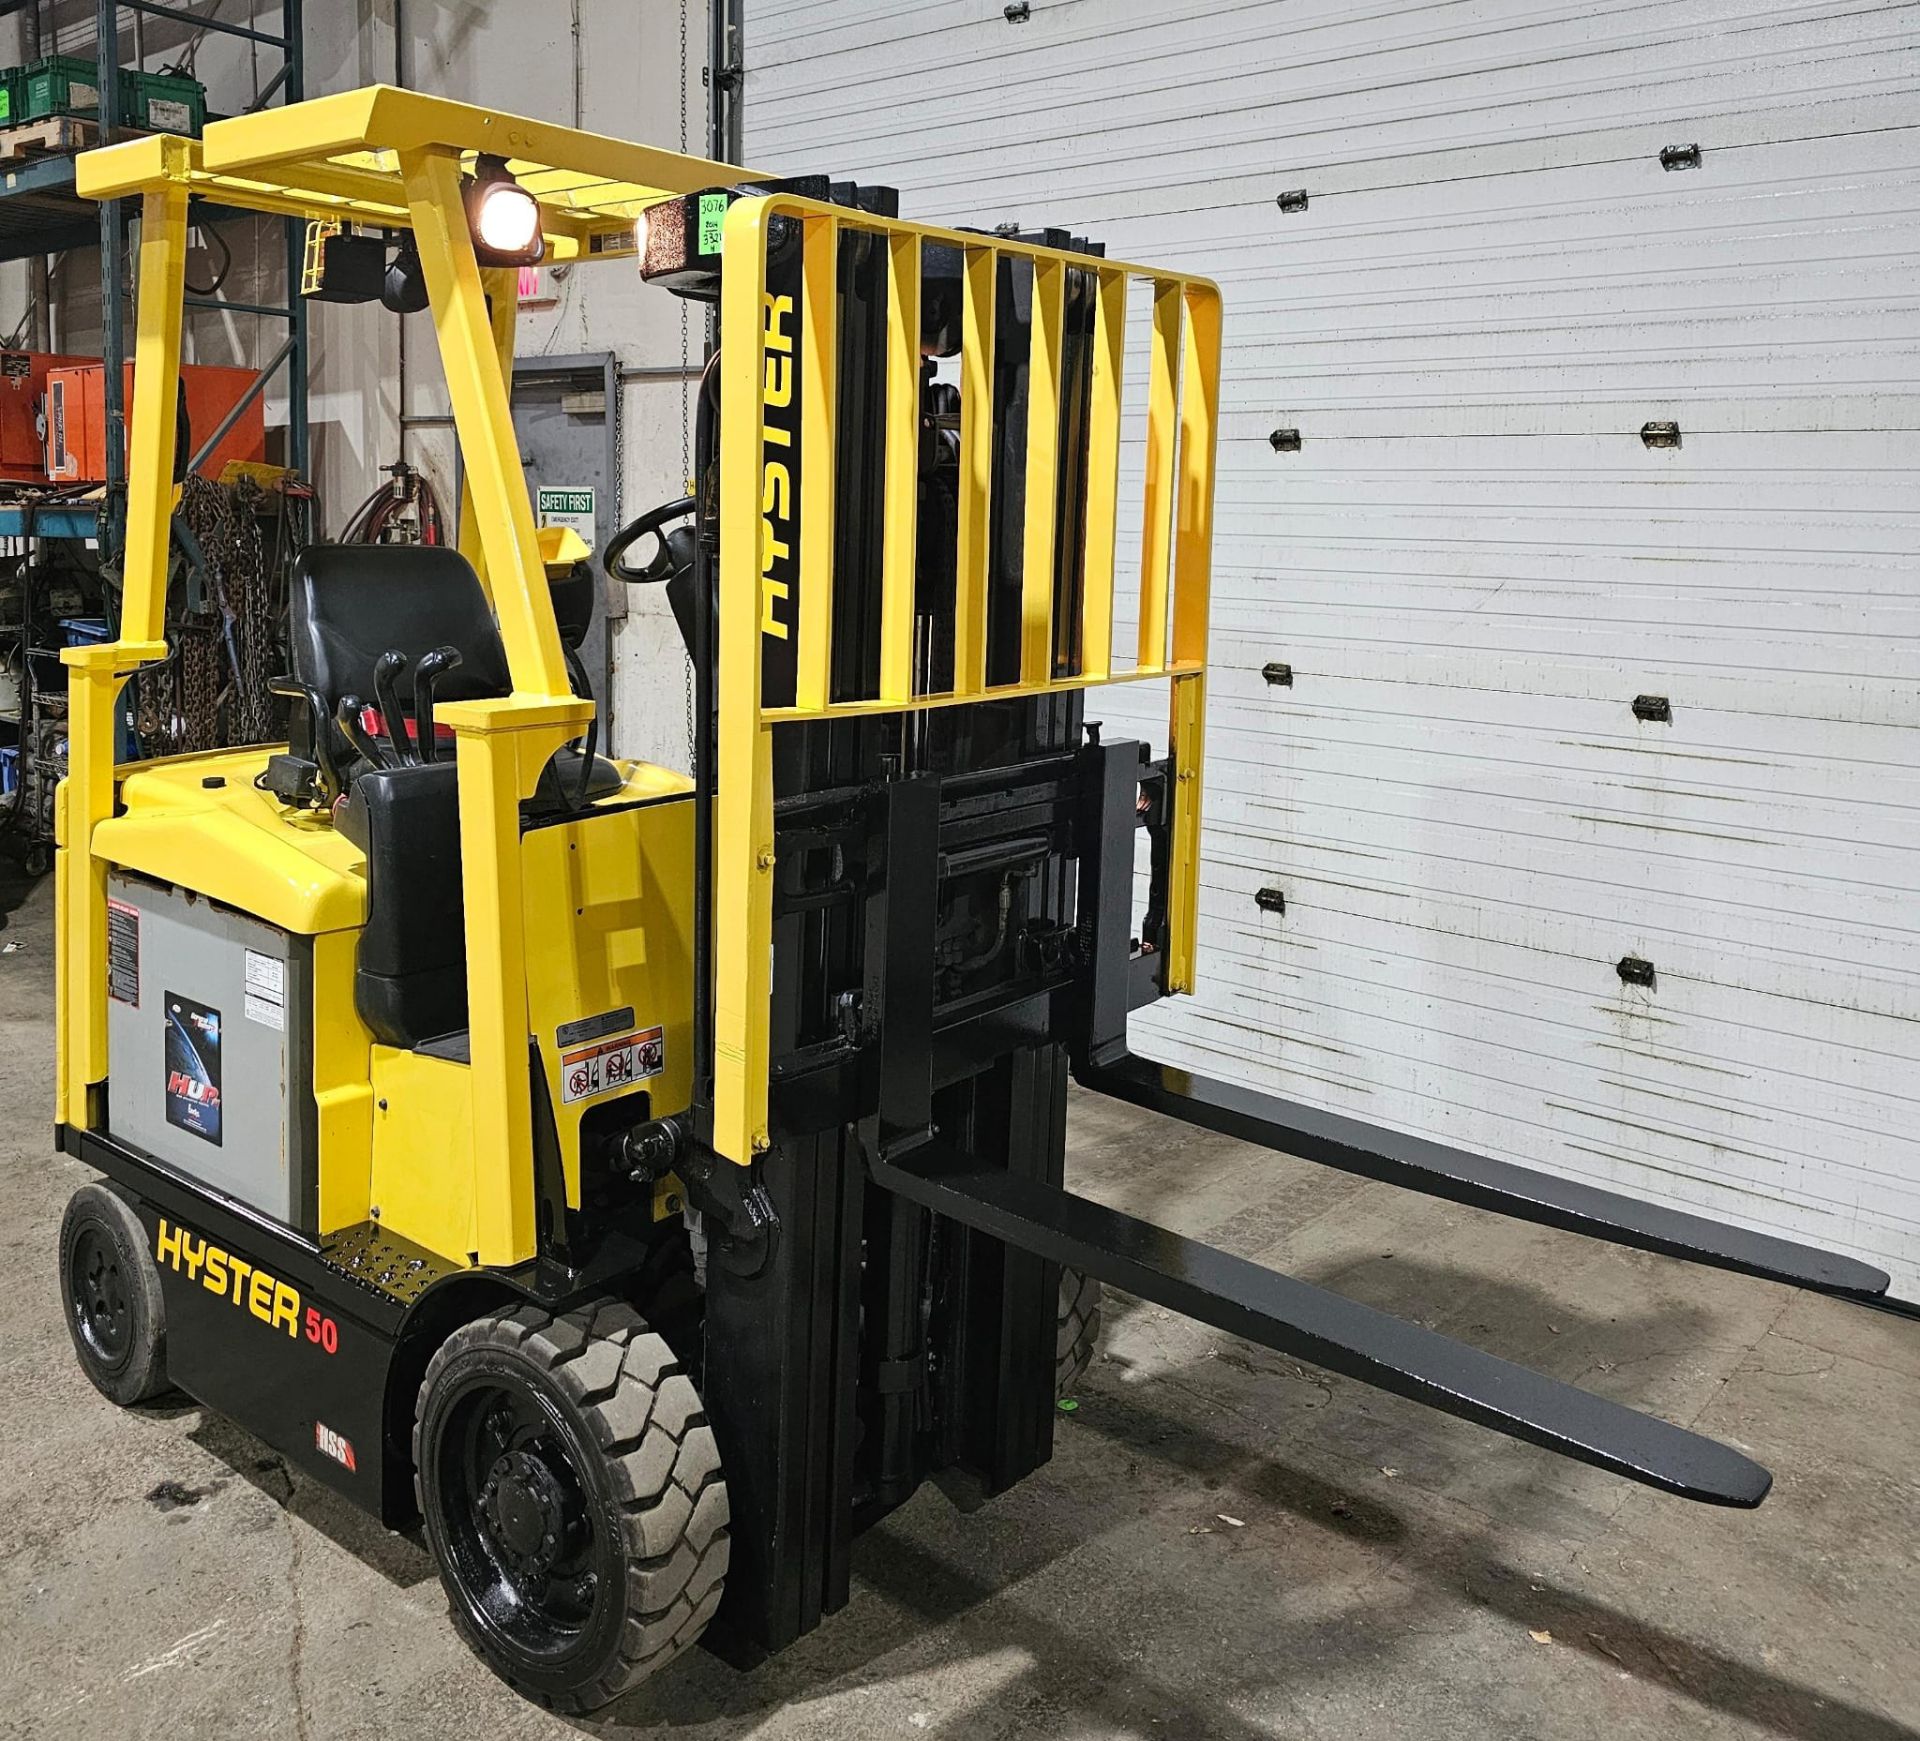 2014 Hyster 5,000lbs Capacity Electric Forklift 36V with sideshift 3-STAGE MAST 189" load height - Image 5 of 6